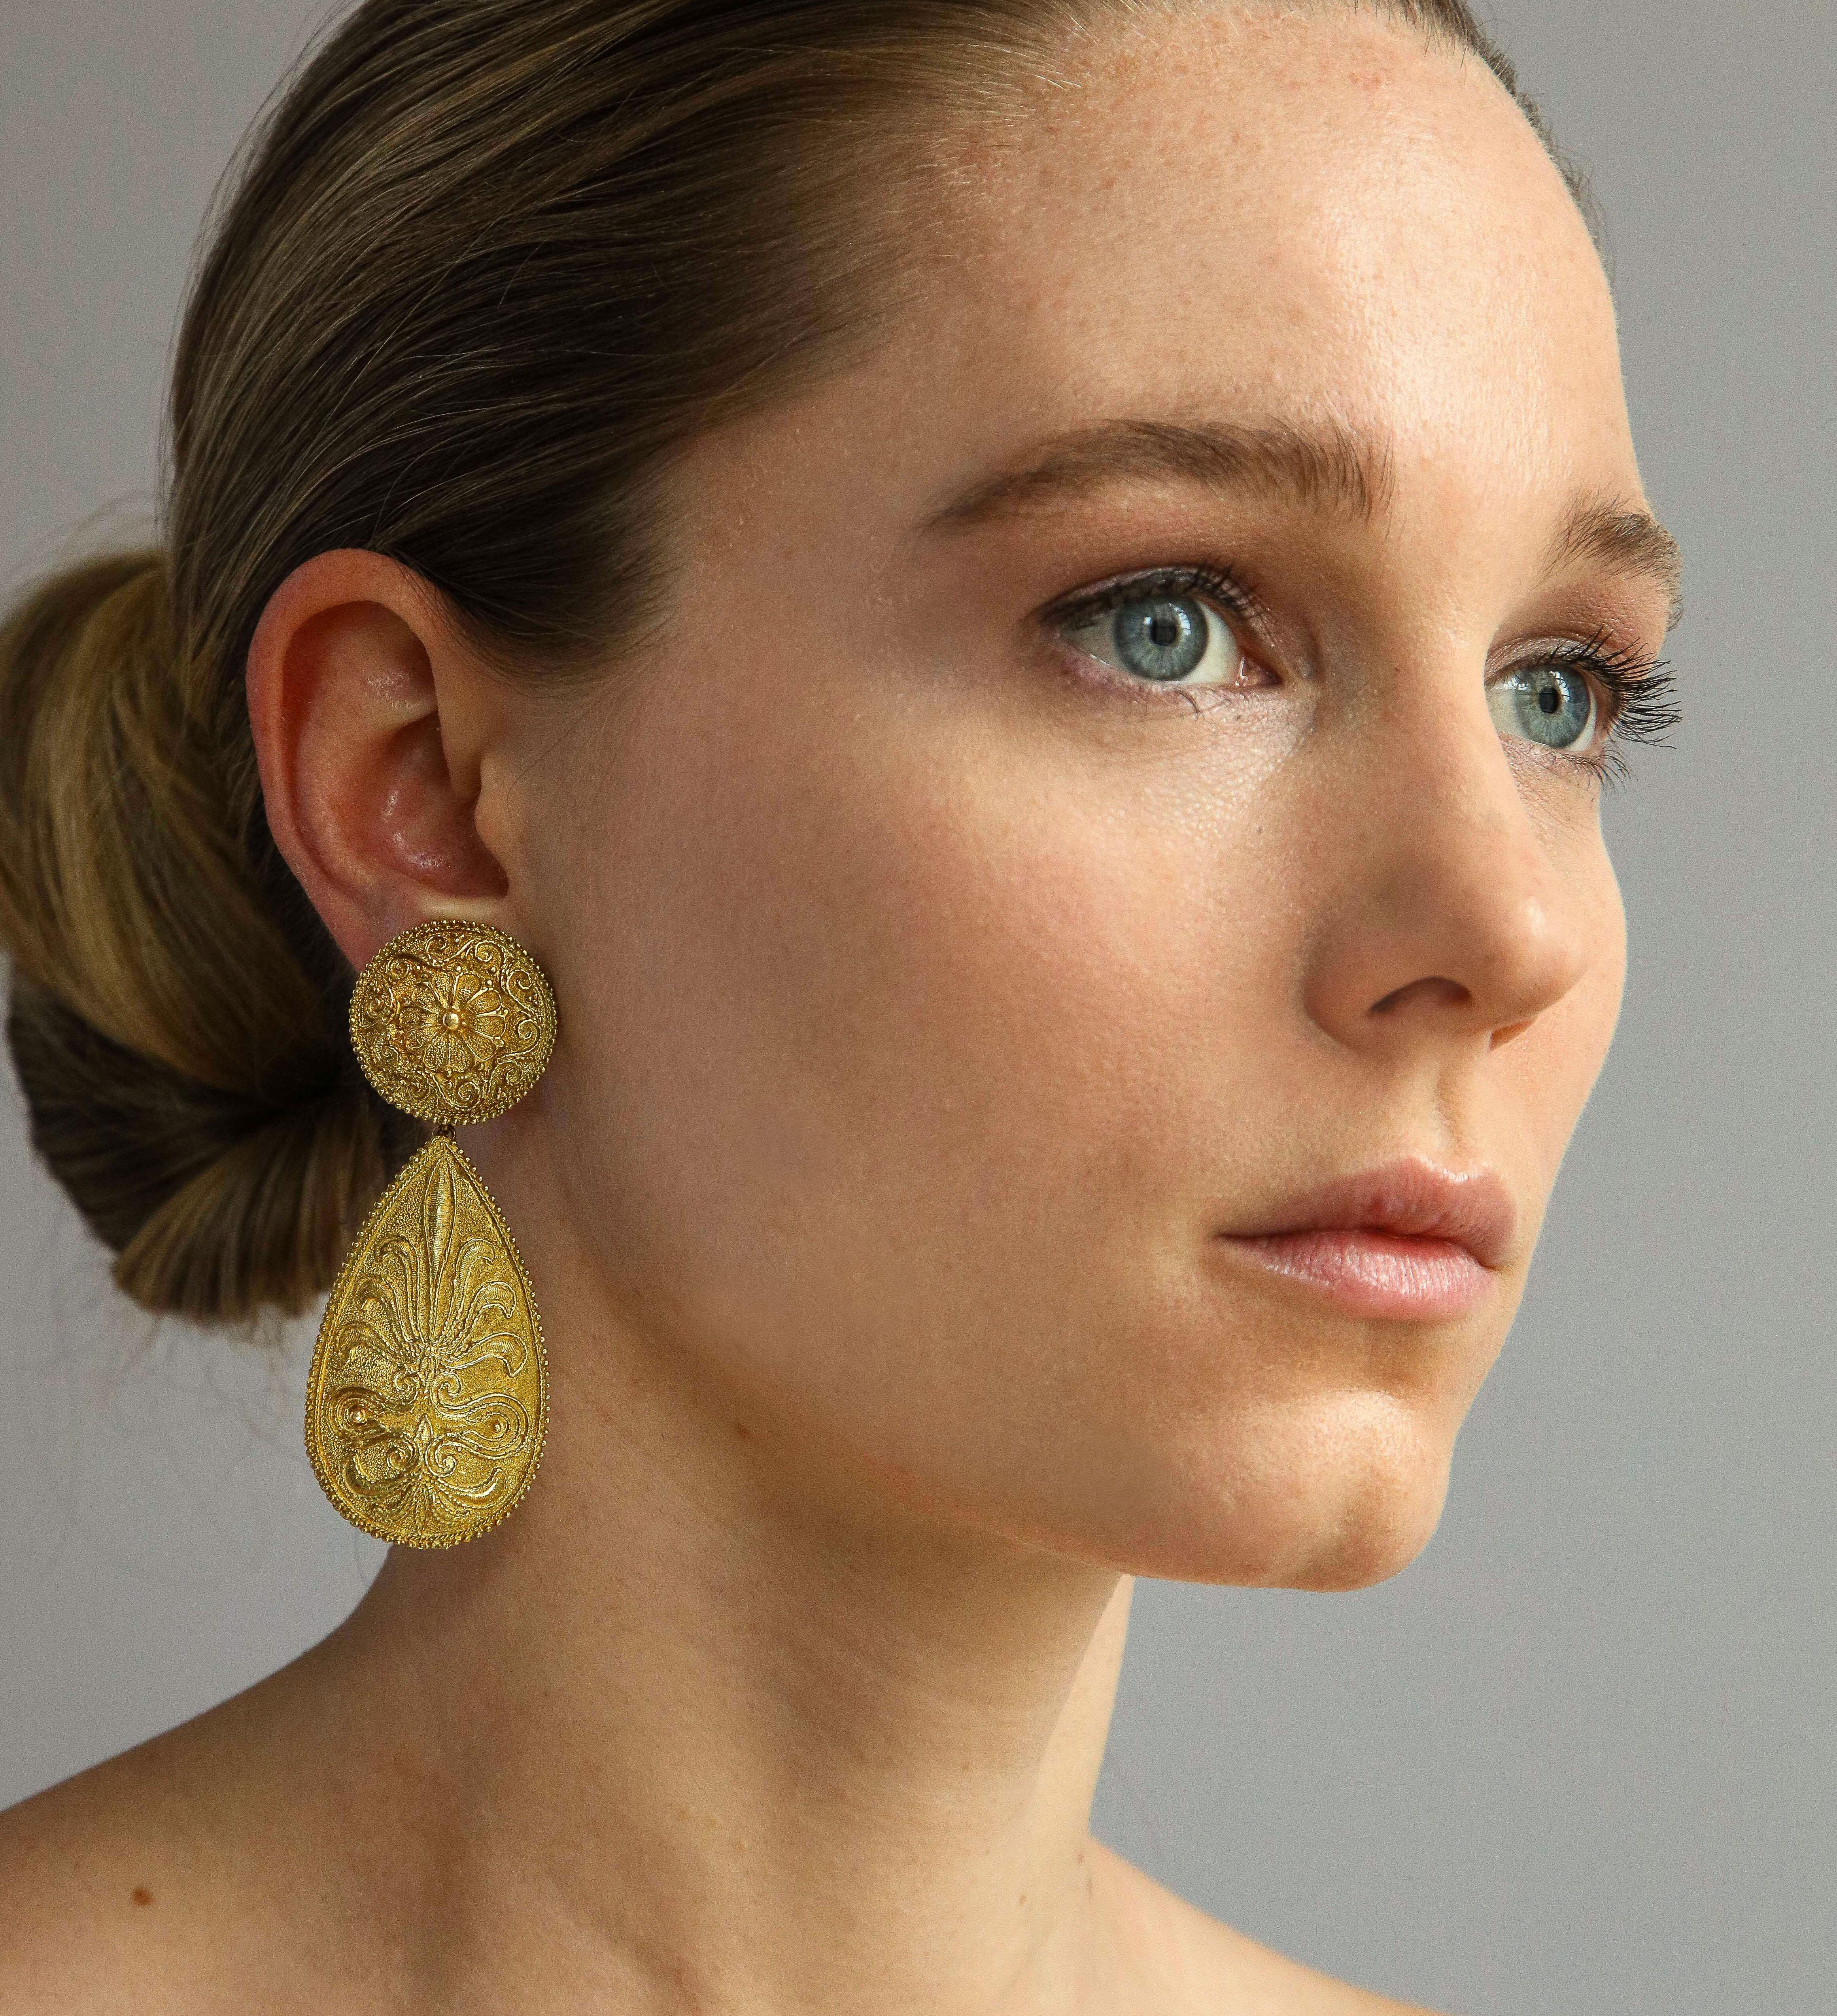 Sophisticated for dinner or poolside 1970s 18K gold pendant earrings with classic Italian decorative motifs offering a rich look and subtle movement. Maker mark AL, gold mark  750, and registry numbers. Measuring 1 1/8 inch wide x 2 7/8 inches long.